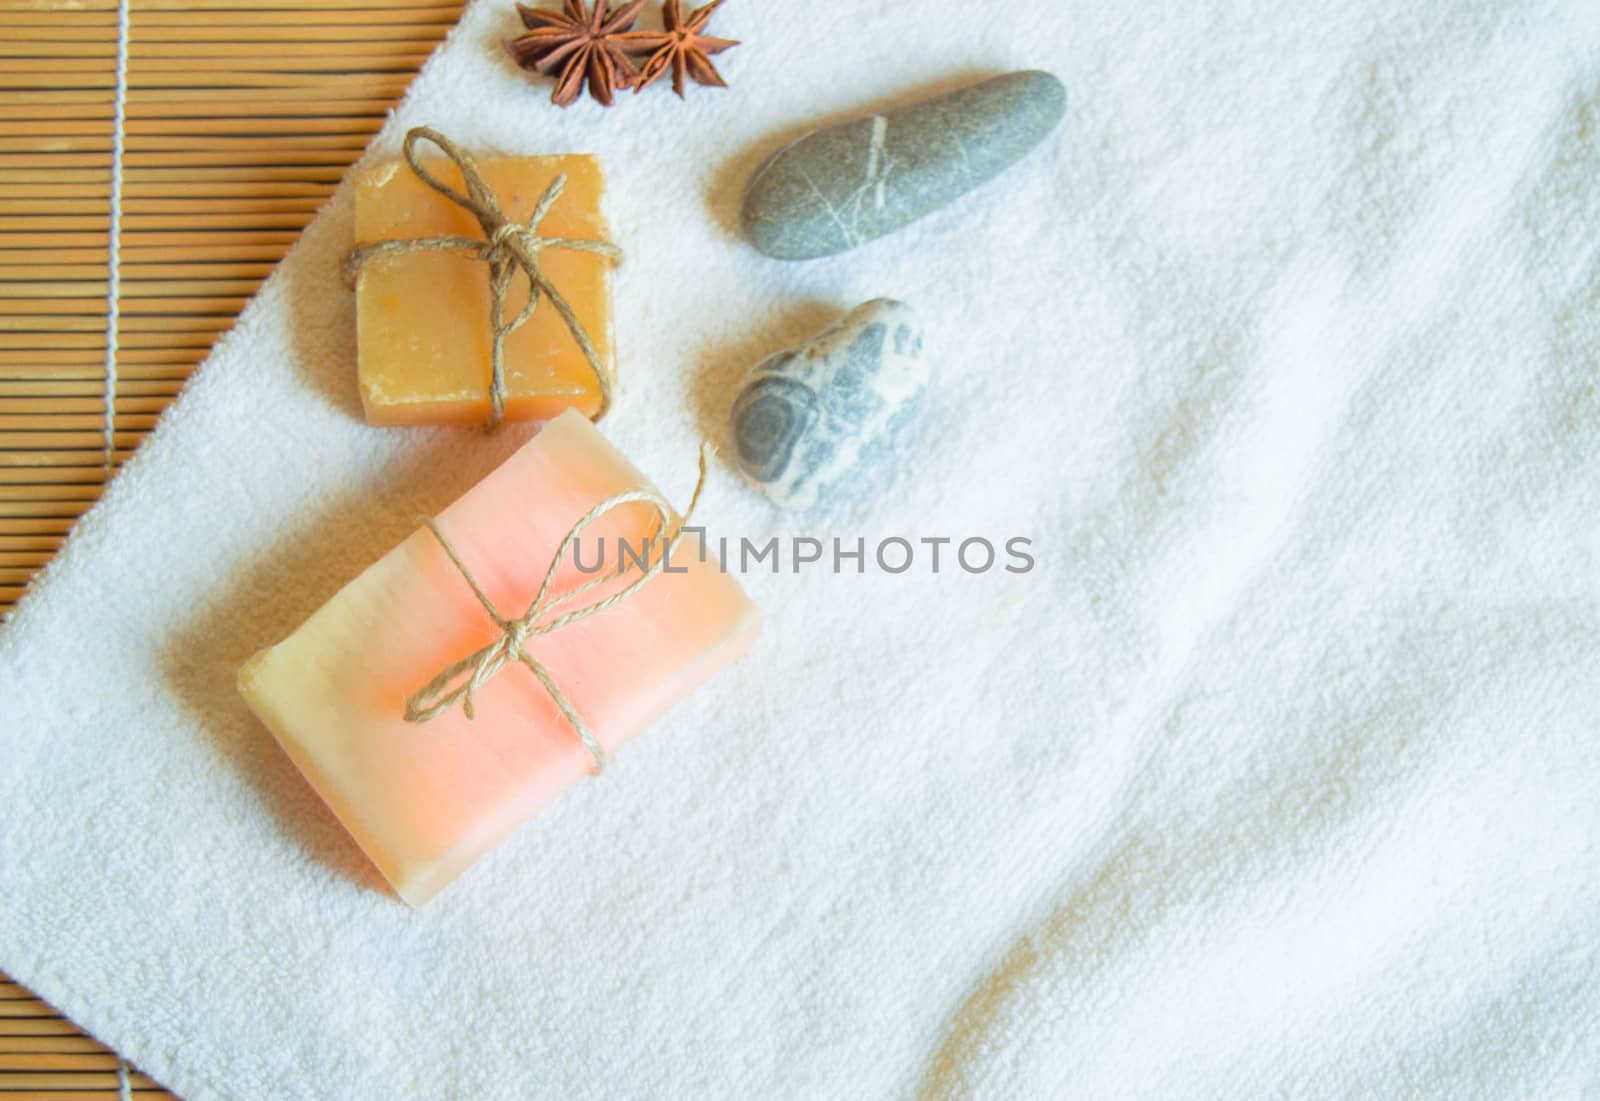 Spa setting with white towel, handmade soap, stones, on natural bamboo background, flat lay copy space.